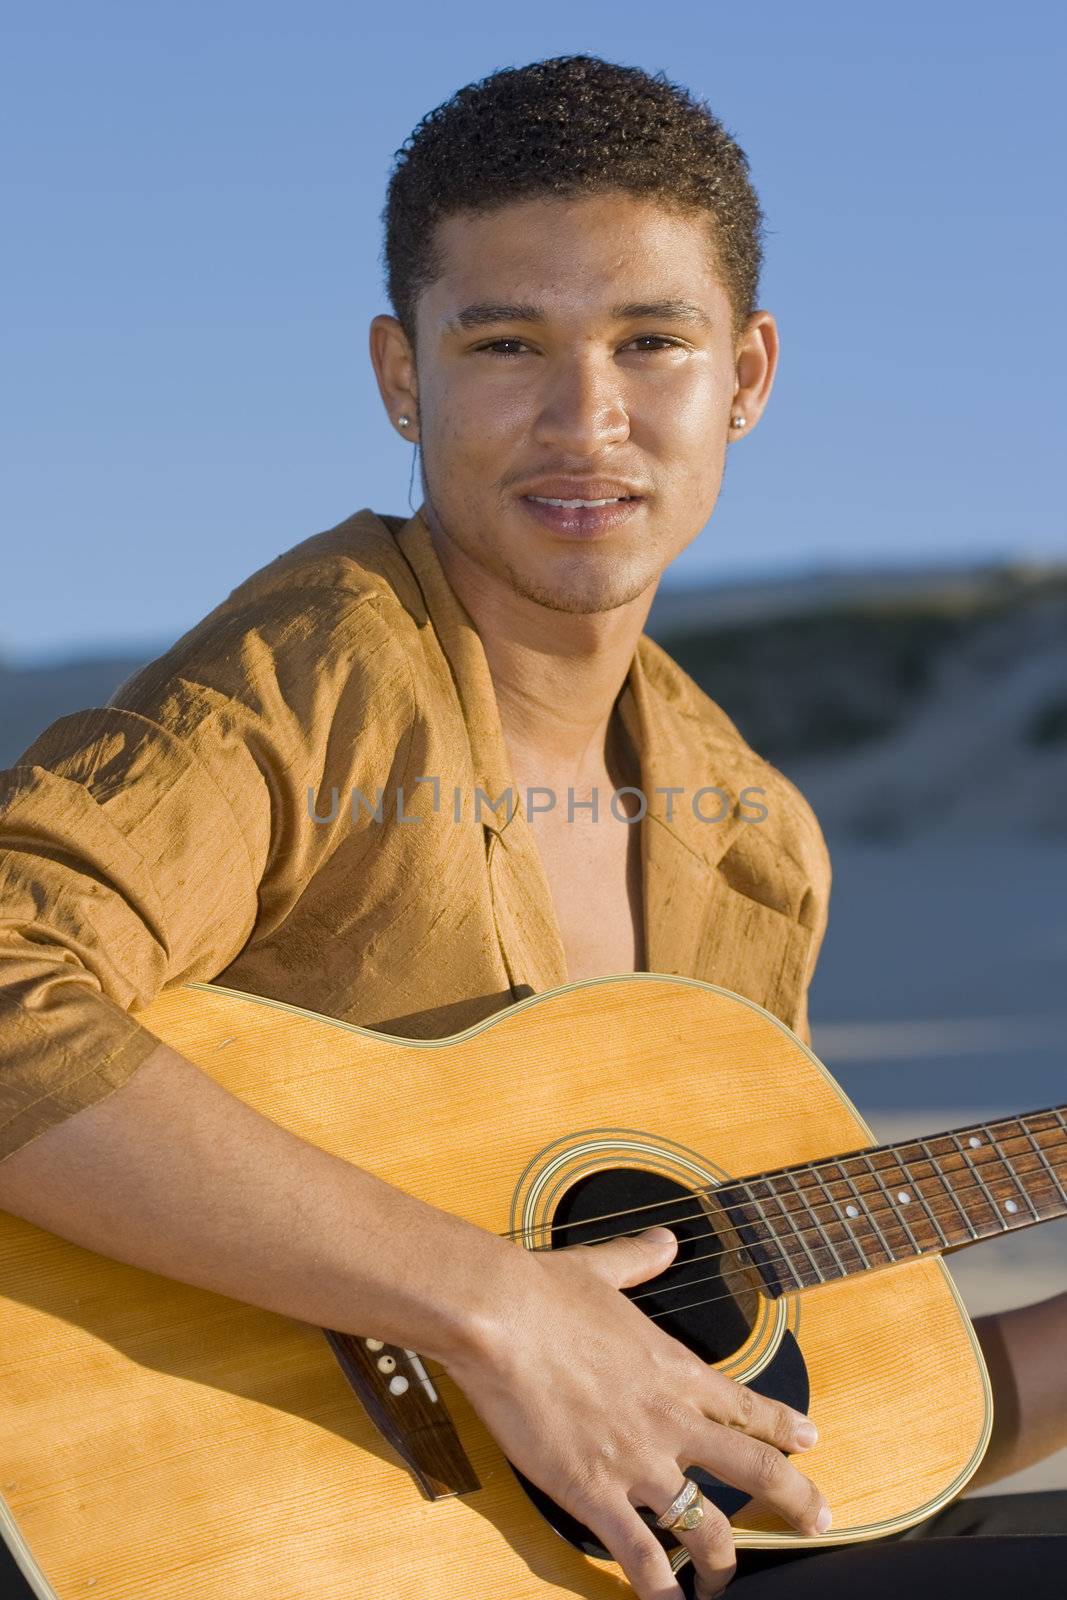 Young musician holding his guitar and looking at the camera